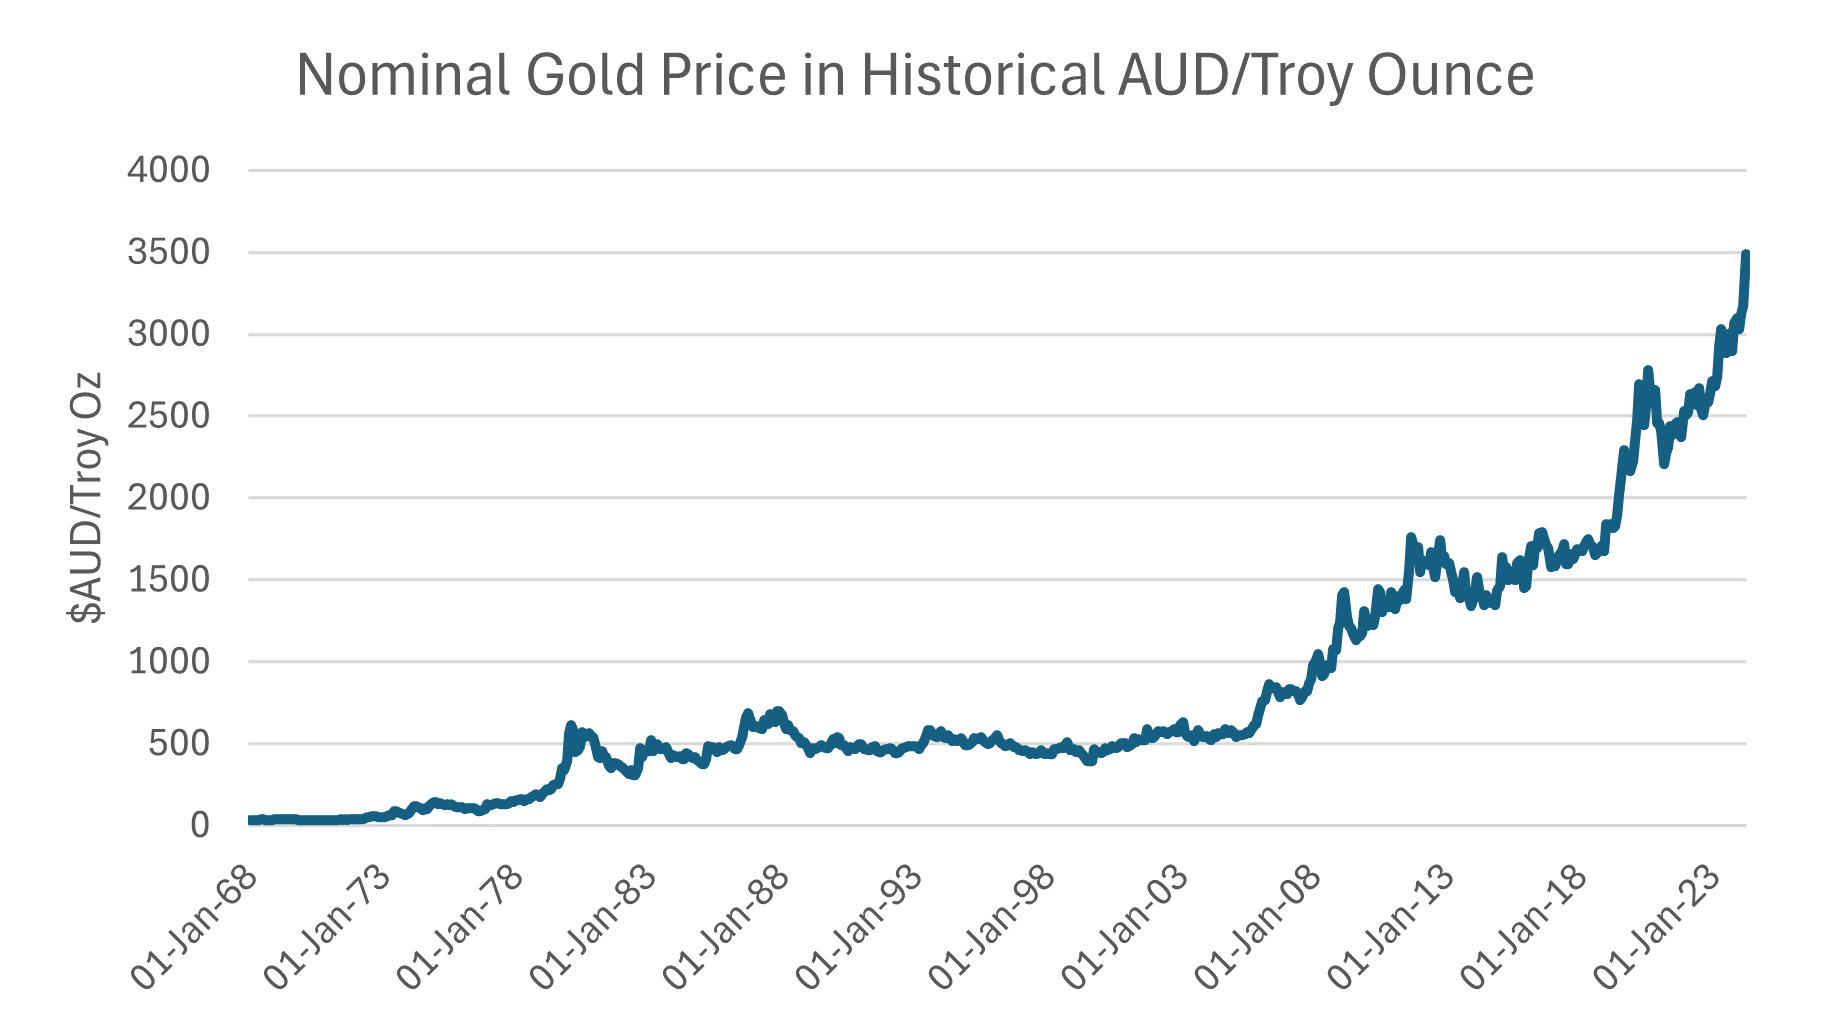 The Australian dollar gold price is rarely discussed in Australian financial markets. Source: LSEG